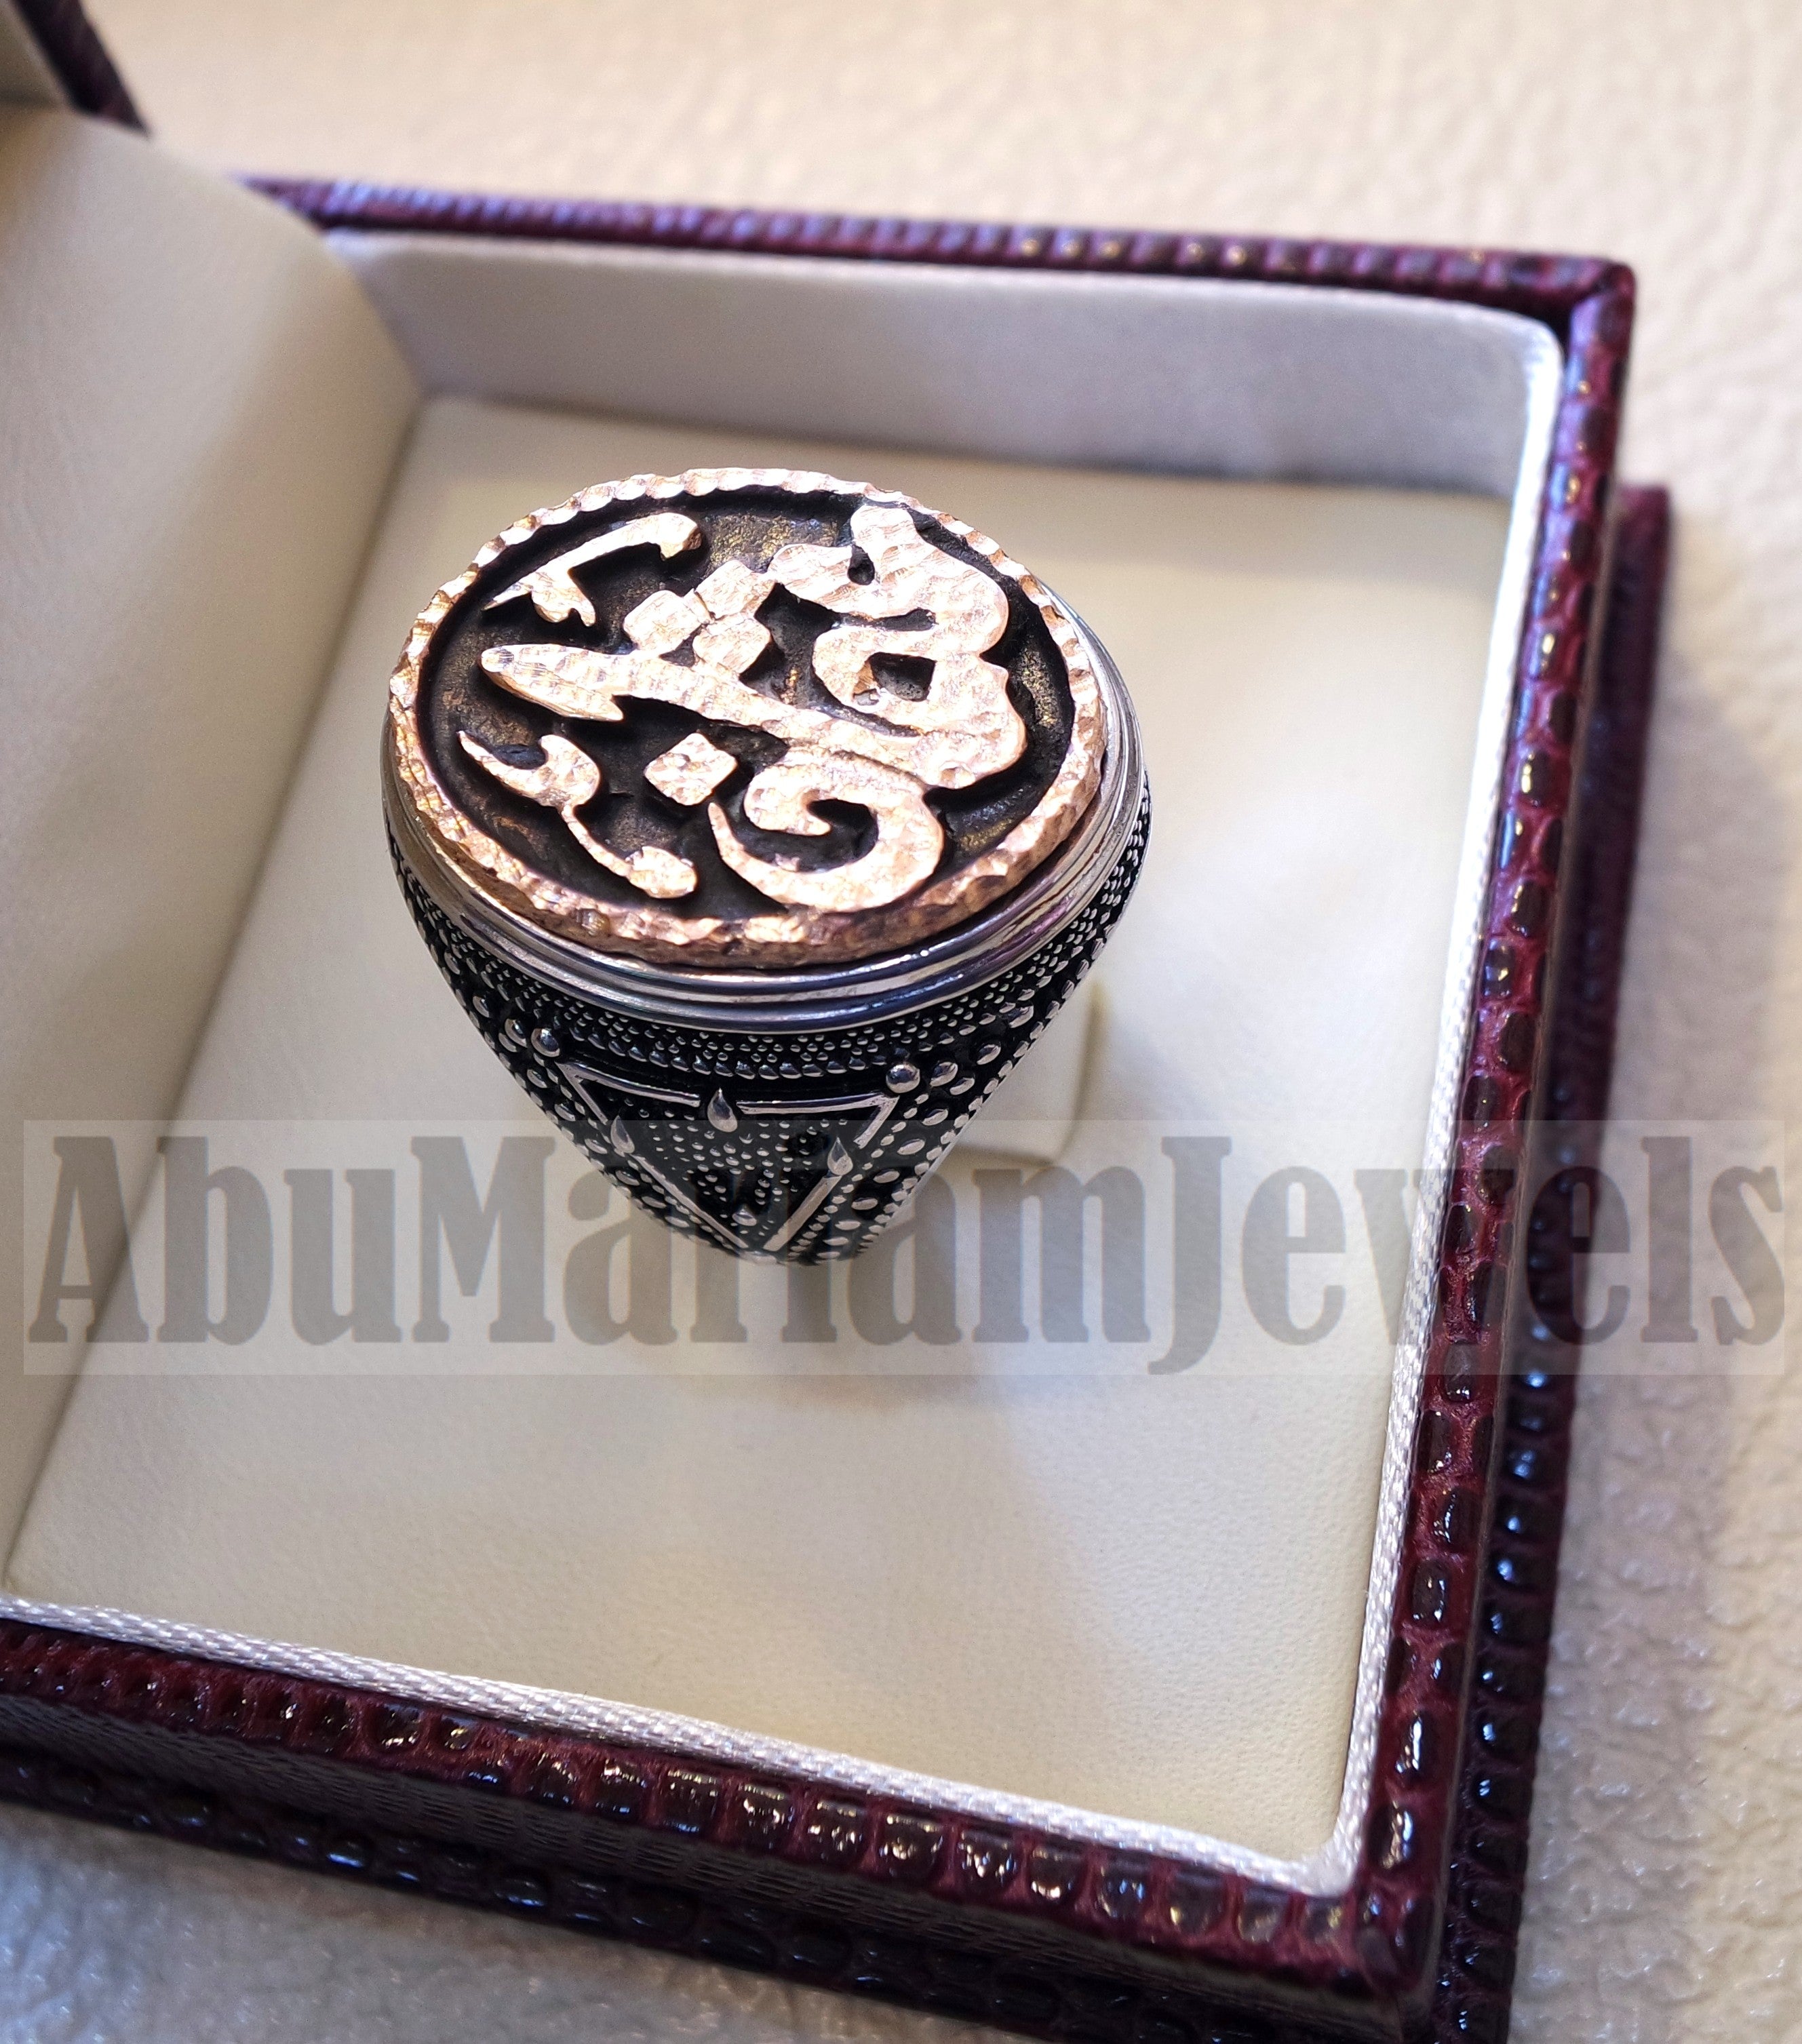 Customized Arabic calligraphy names ring personalized antique jewelry style sterling silver 925 and bronze any size TSB1003 خاتم اسم تفصيل